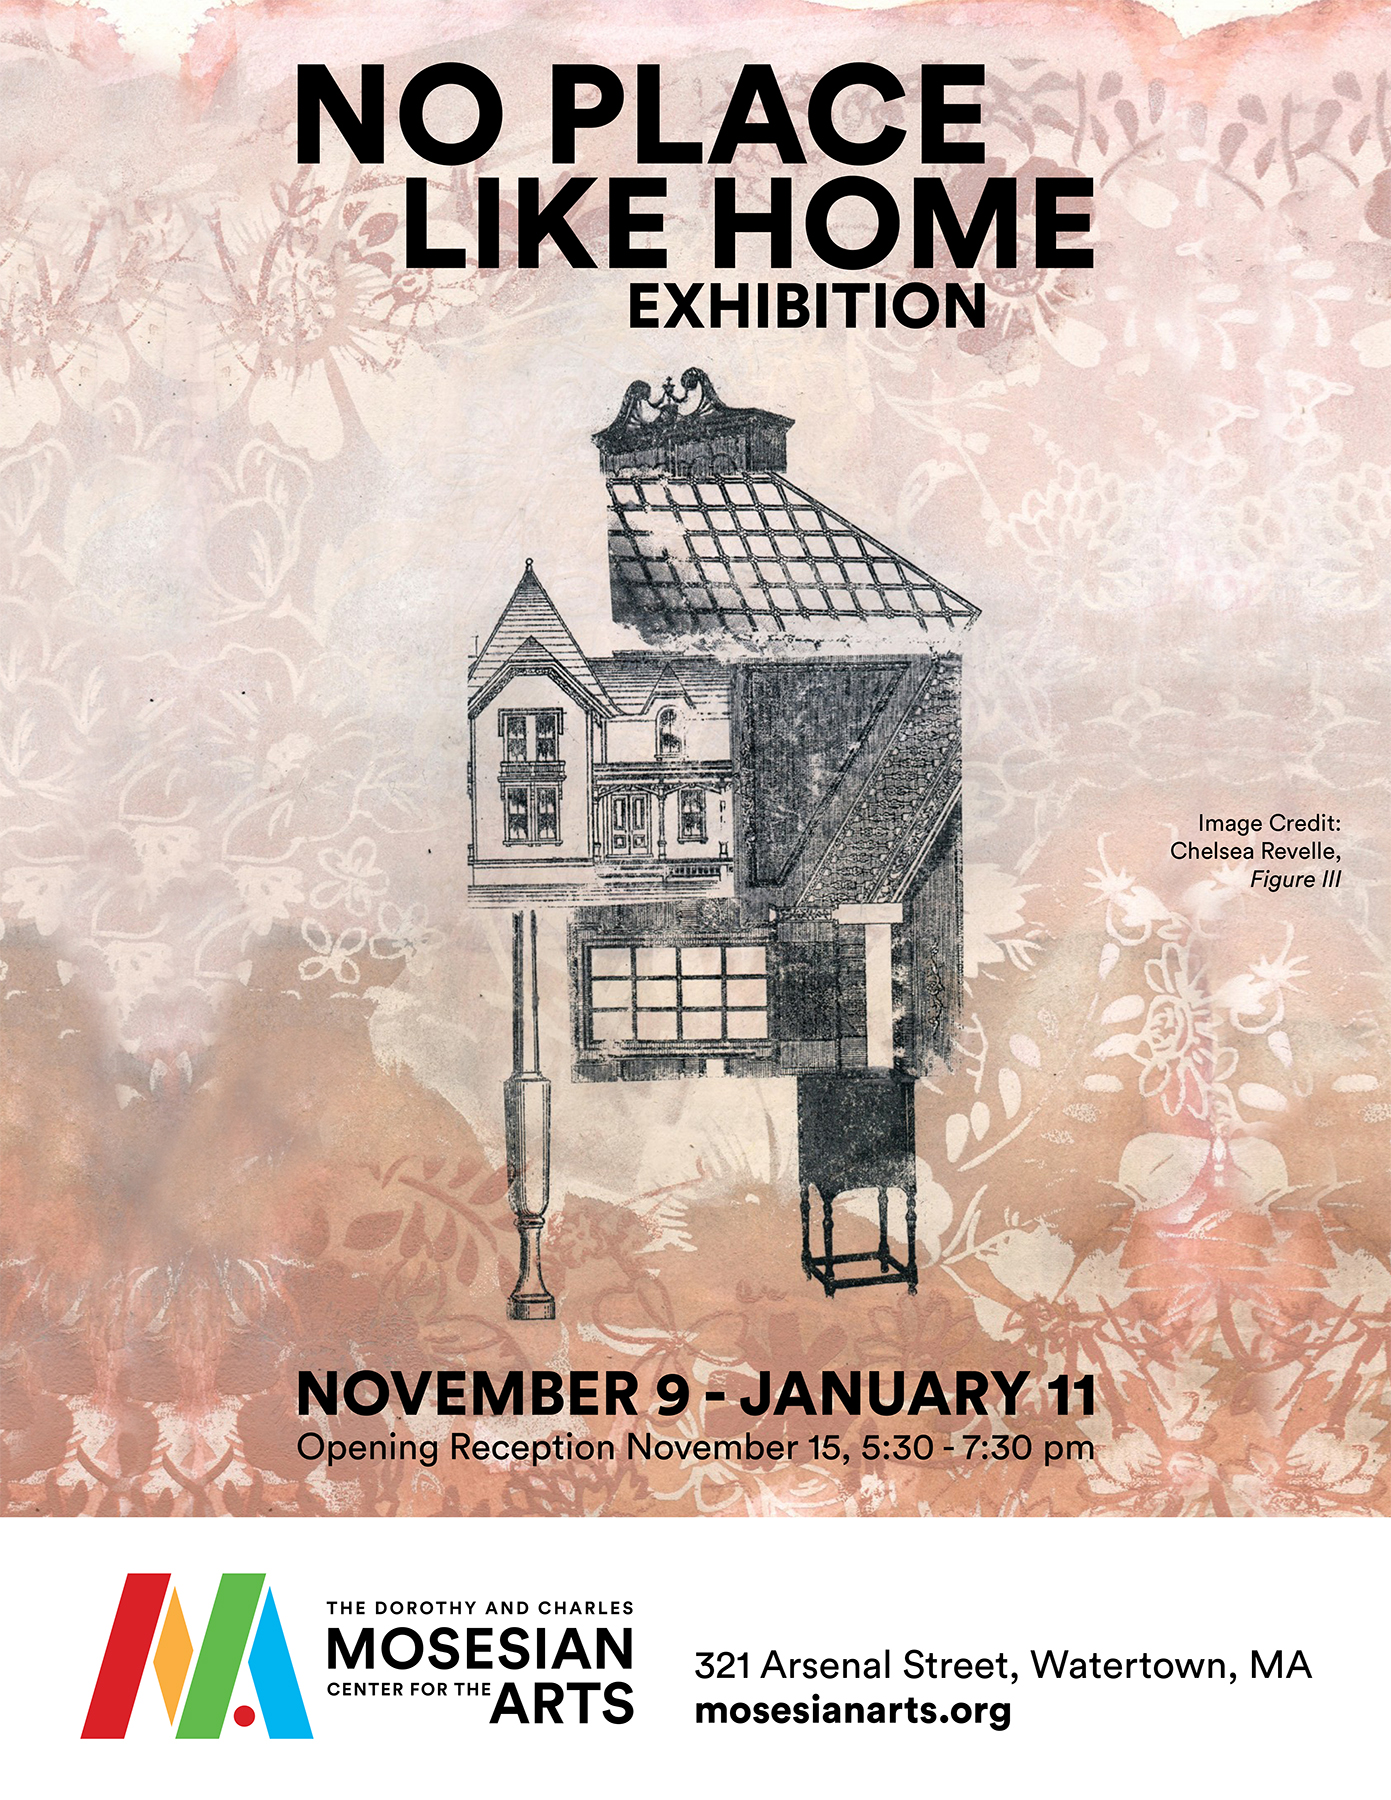  Chelsea Revelle’s work shown on the poster for “No Place Like Home” 